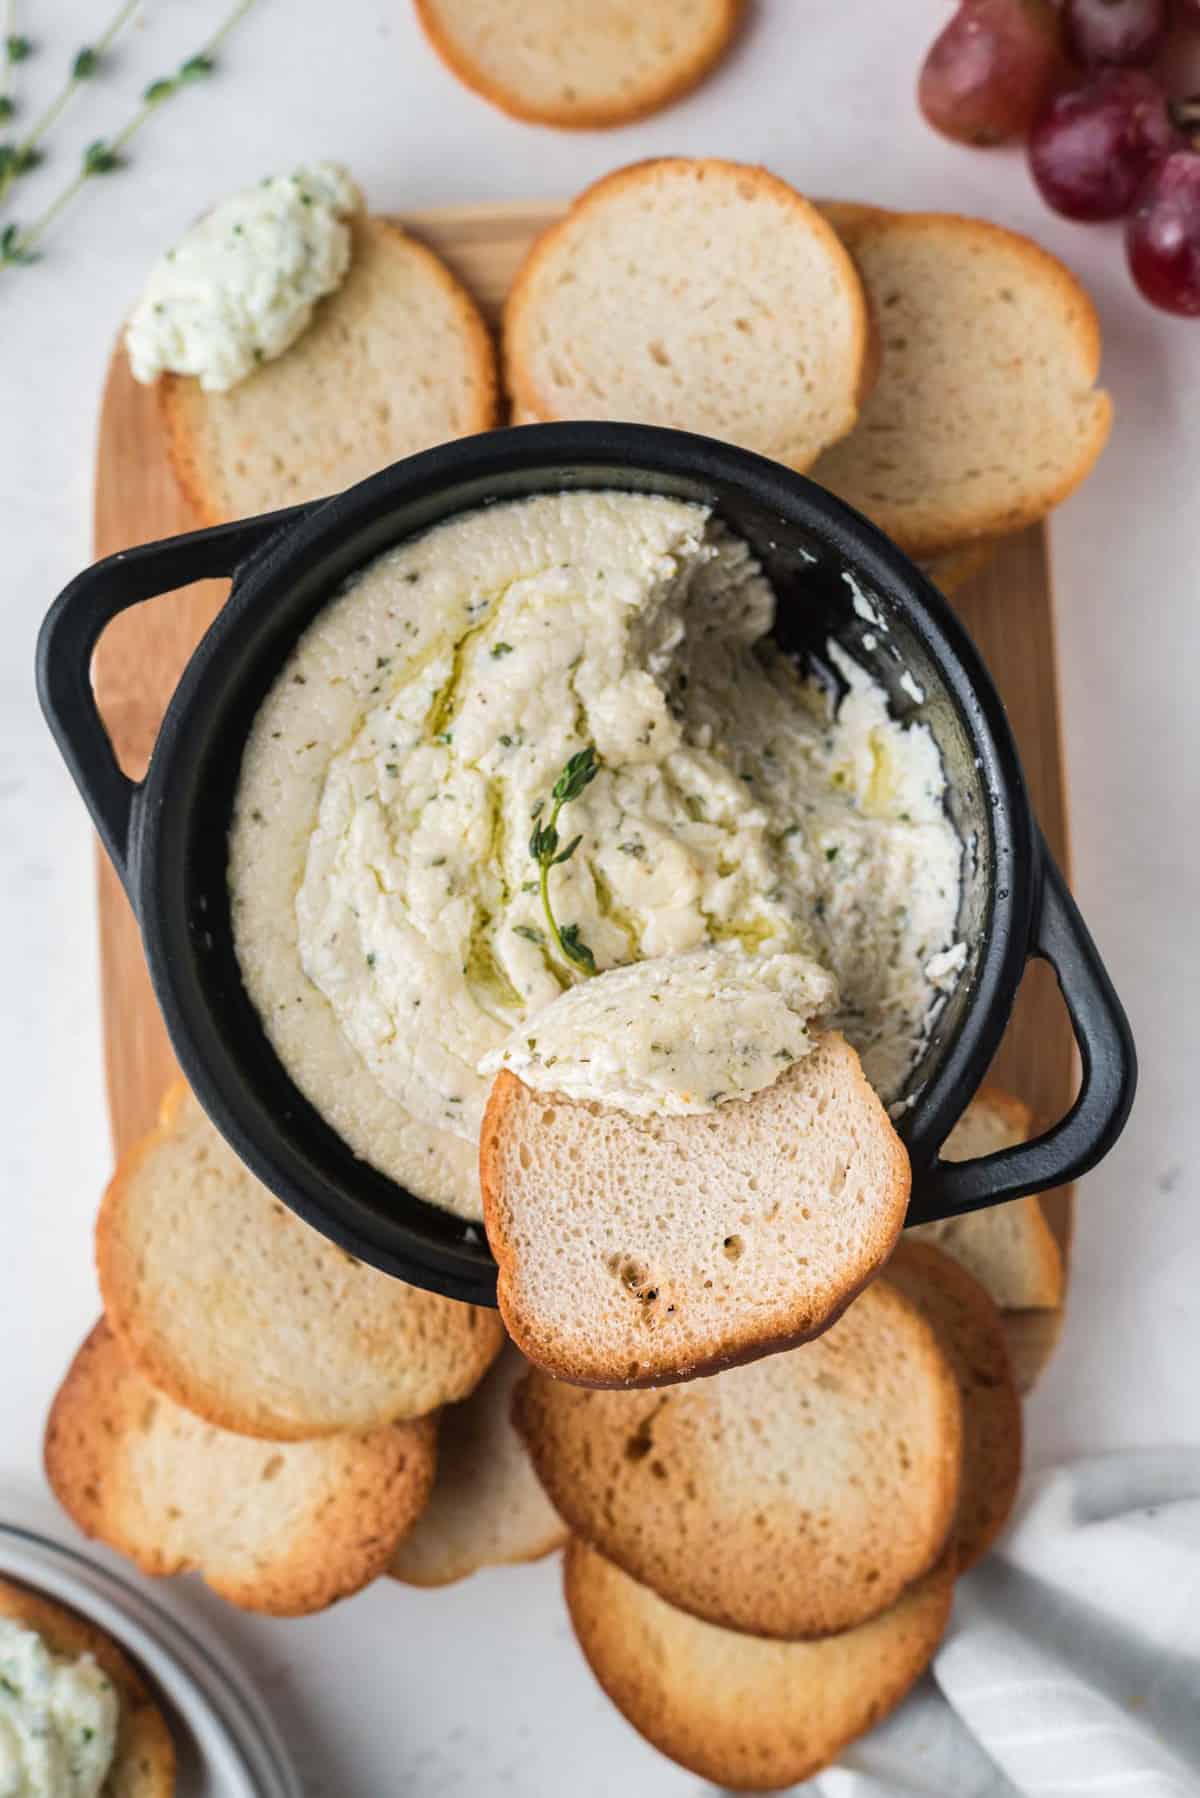 Bread being dipped into goat cheese dip in a black pan.